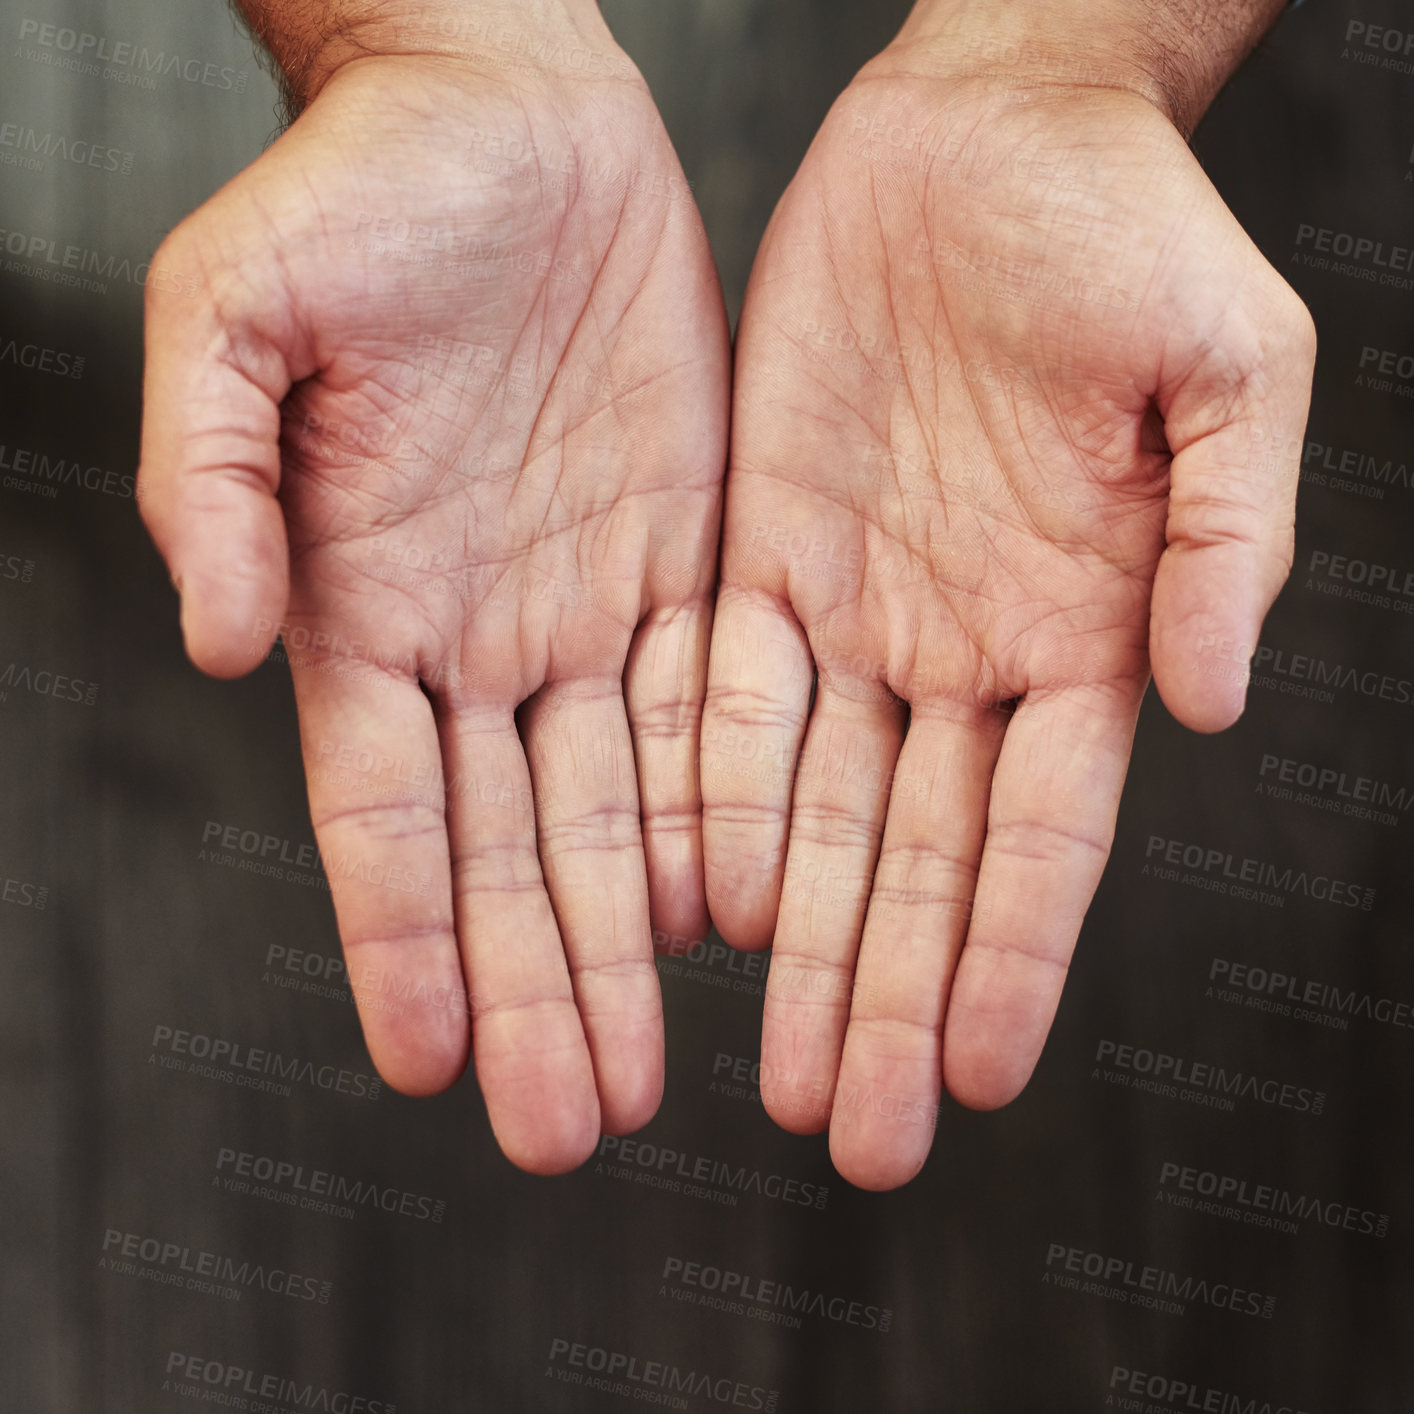 Buy stock photo Studio shot of an unrecognizable person's open hands shown against a dark background